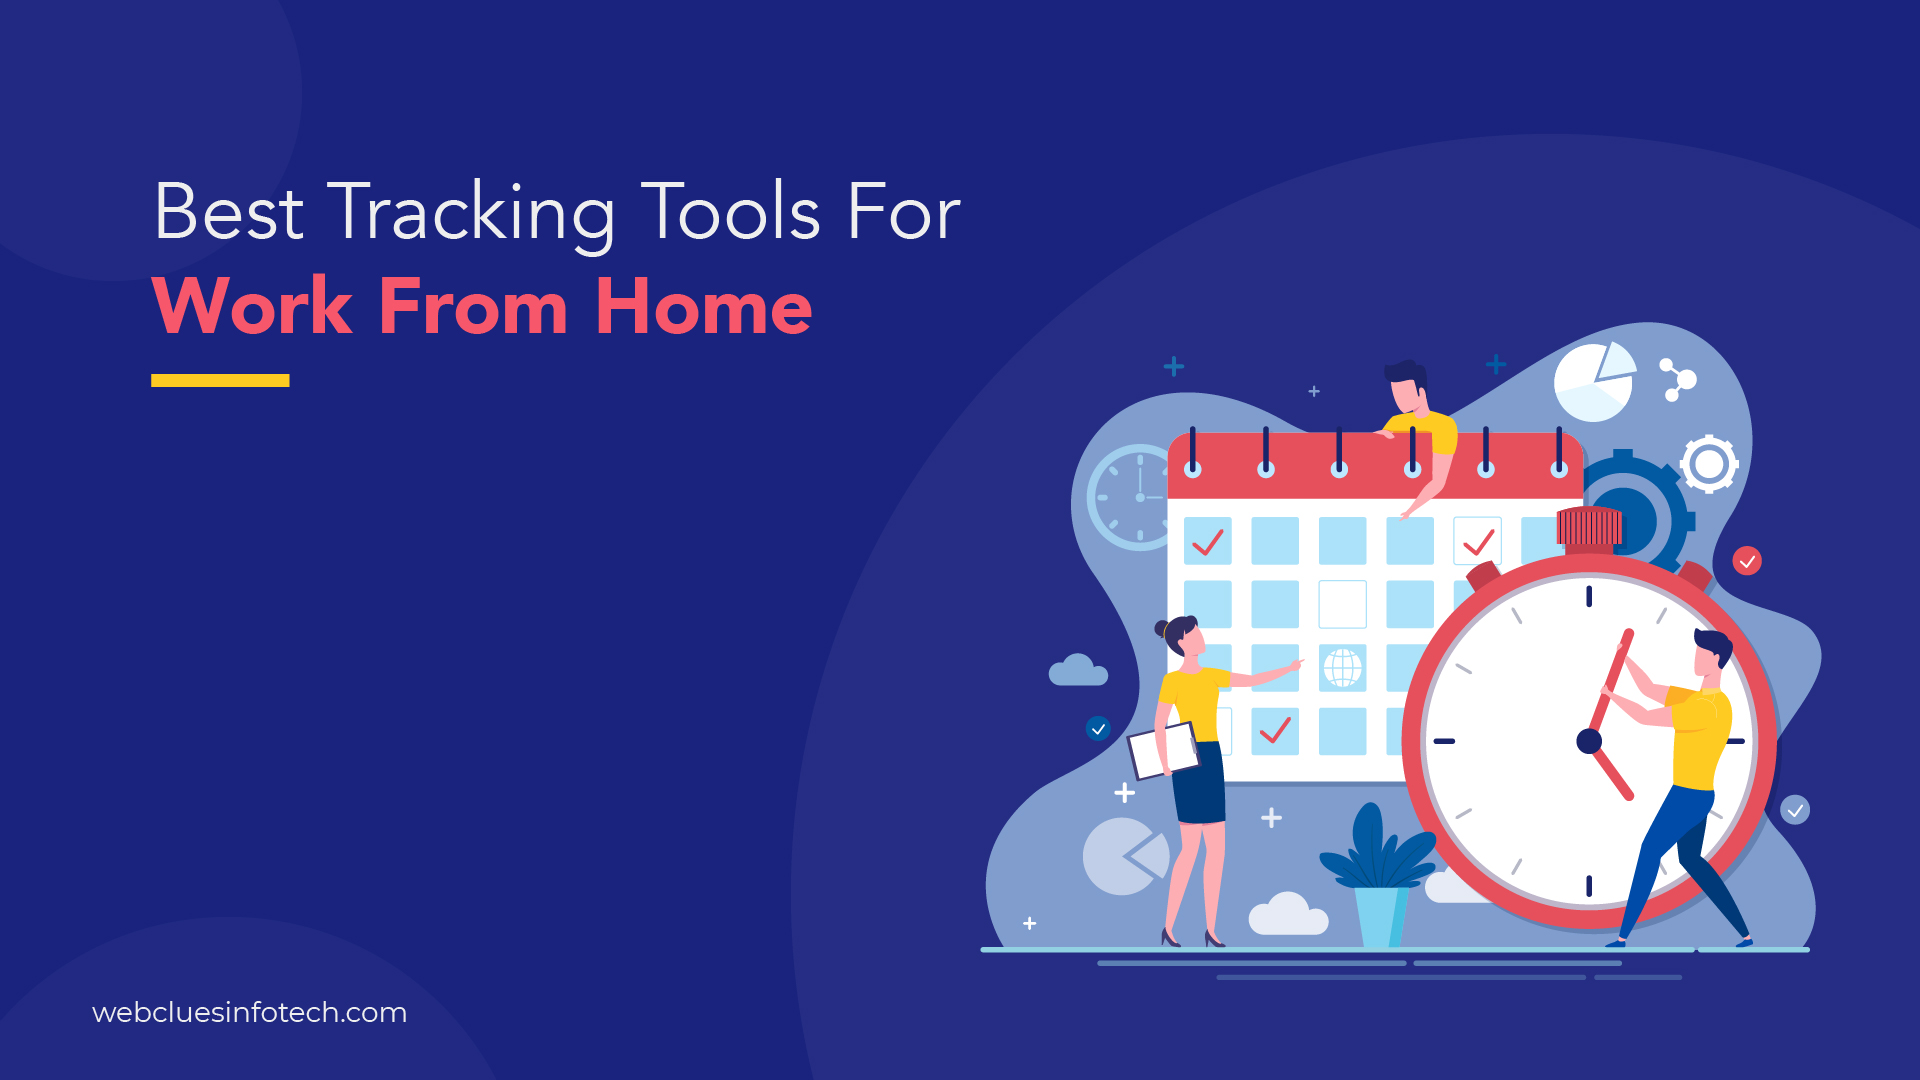 Best Tracking Tools For Work From Home